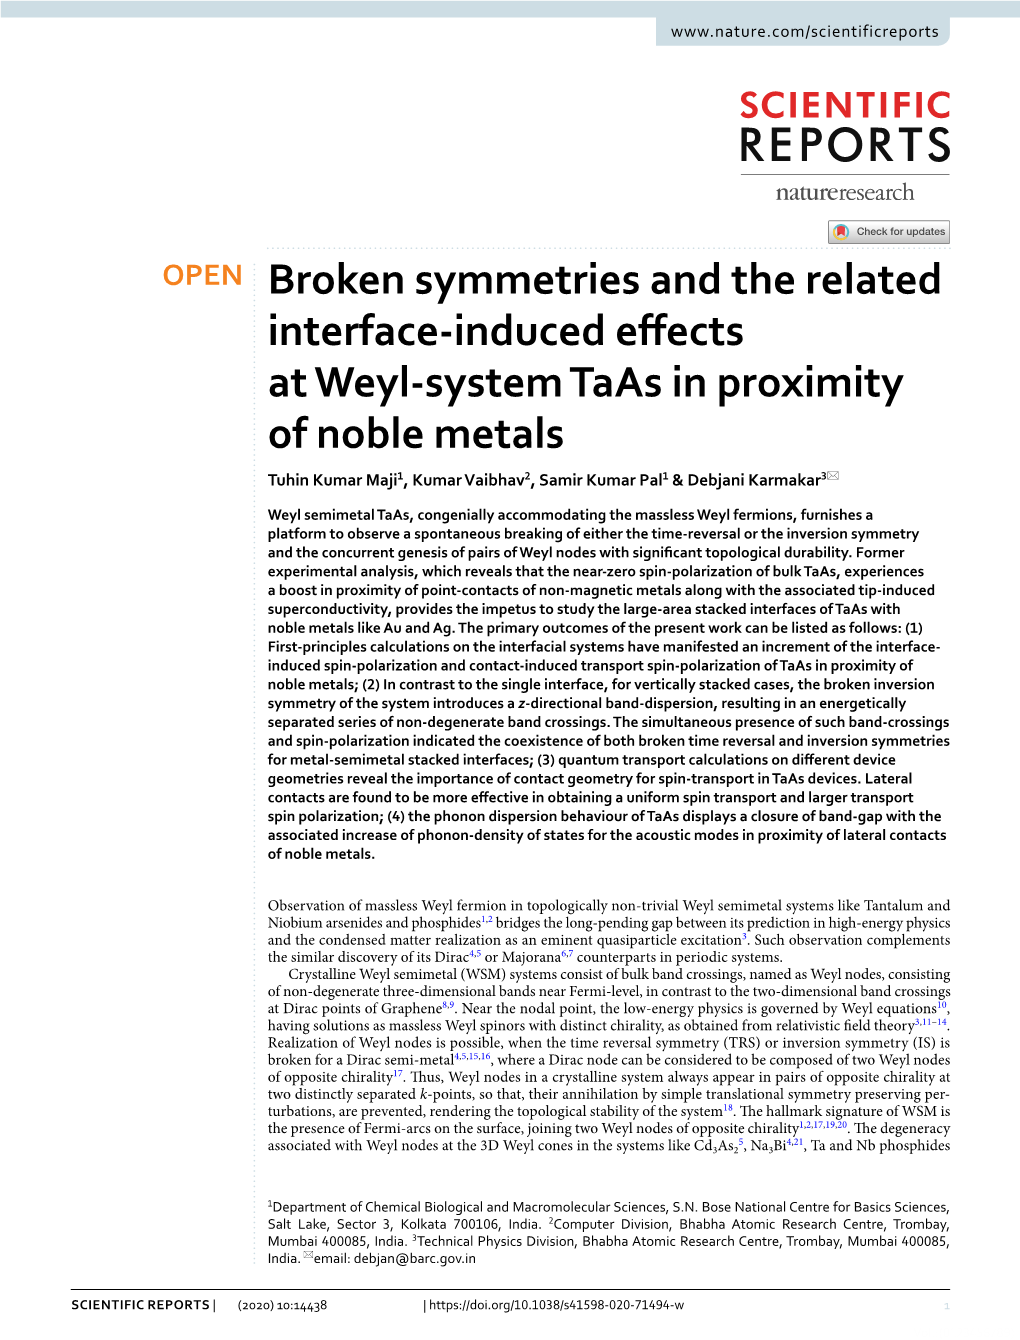 Broken Symmetries and the Related Interface-Induced Effects at Weyl